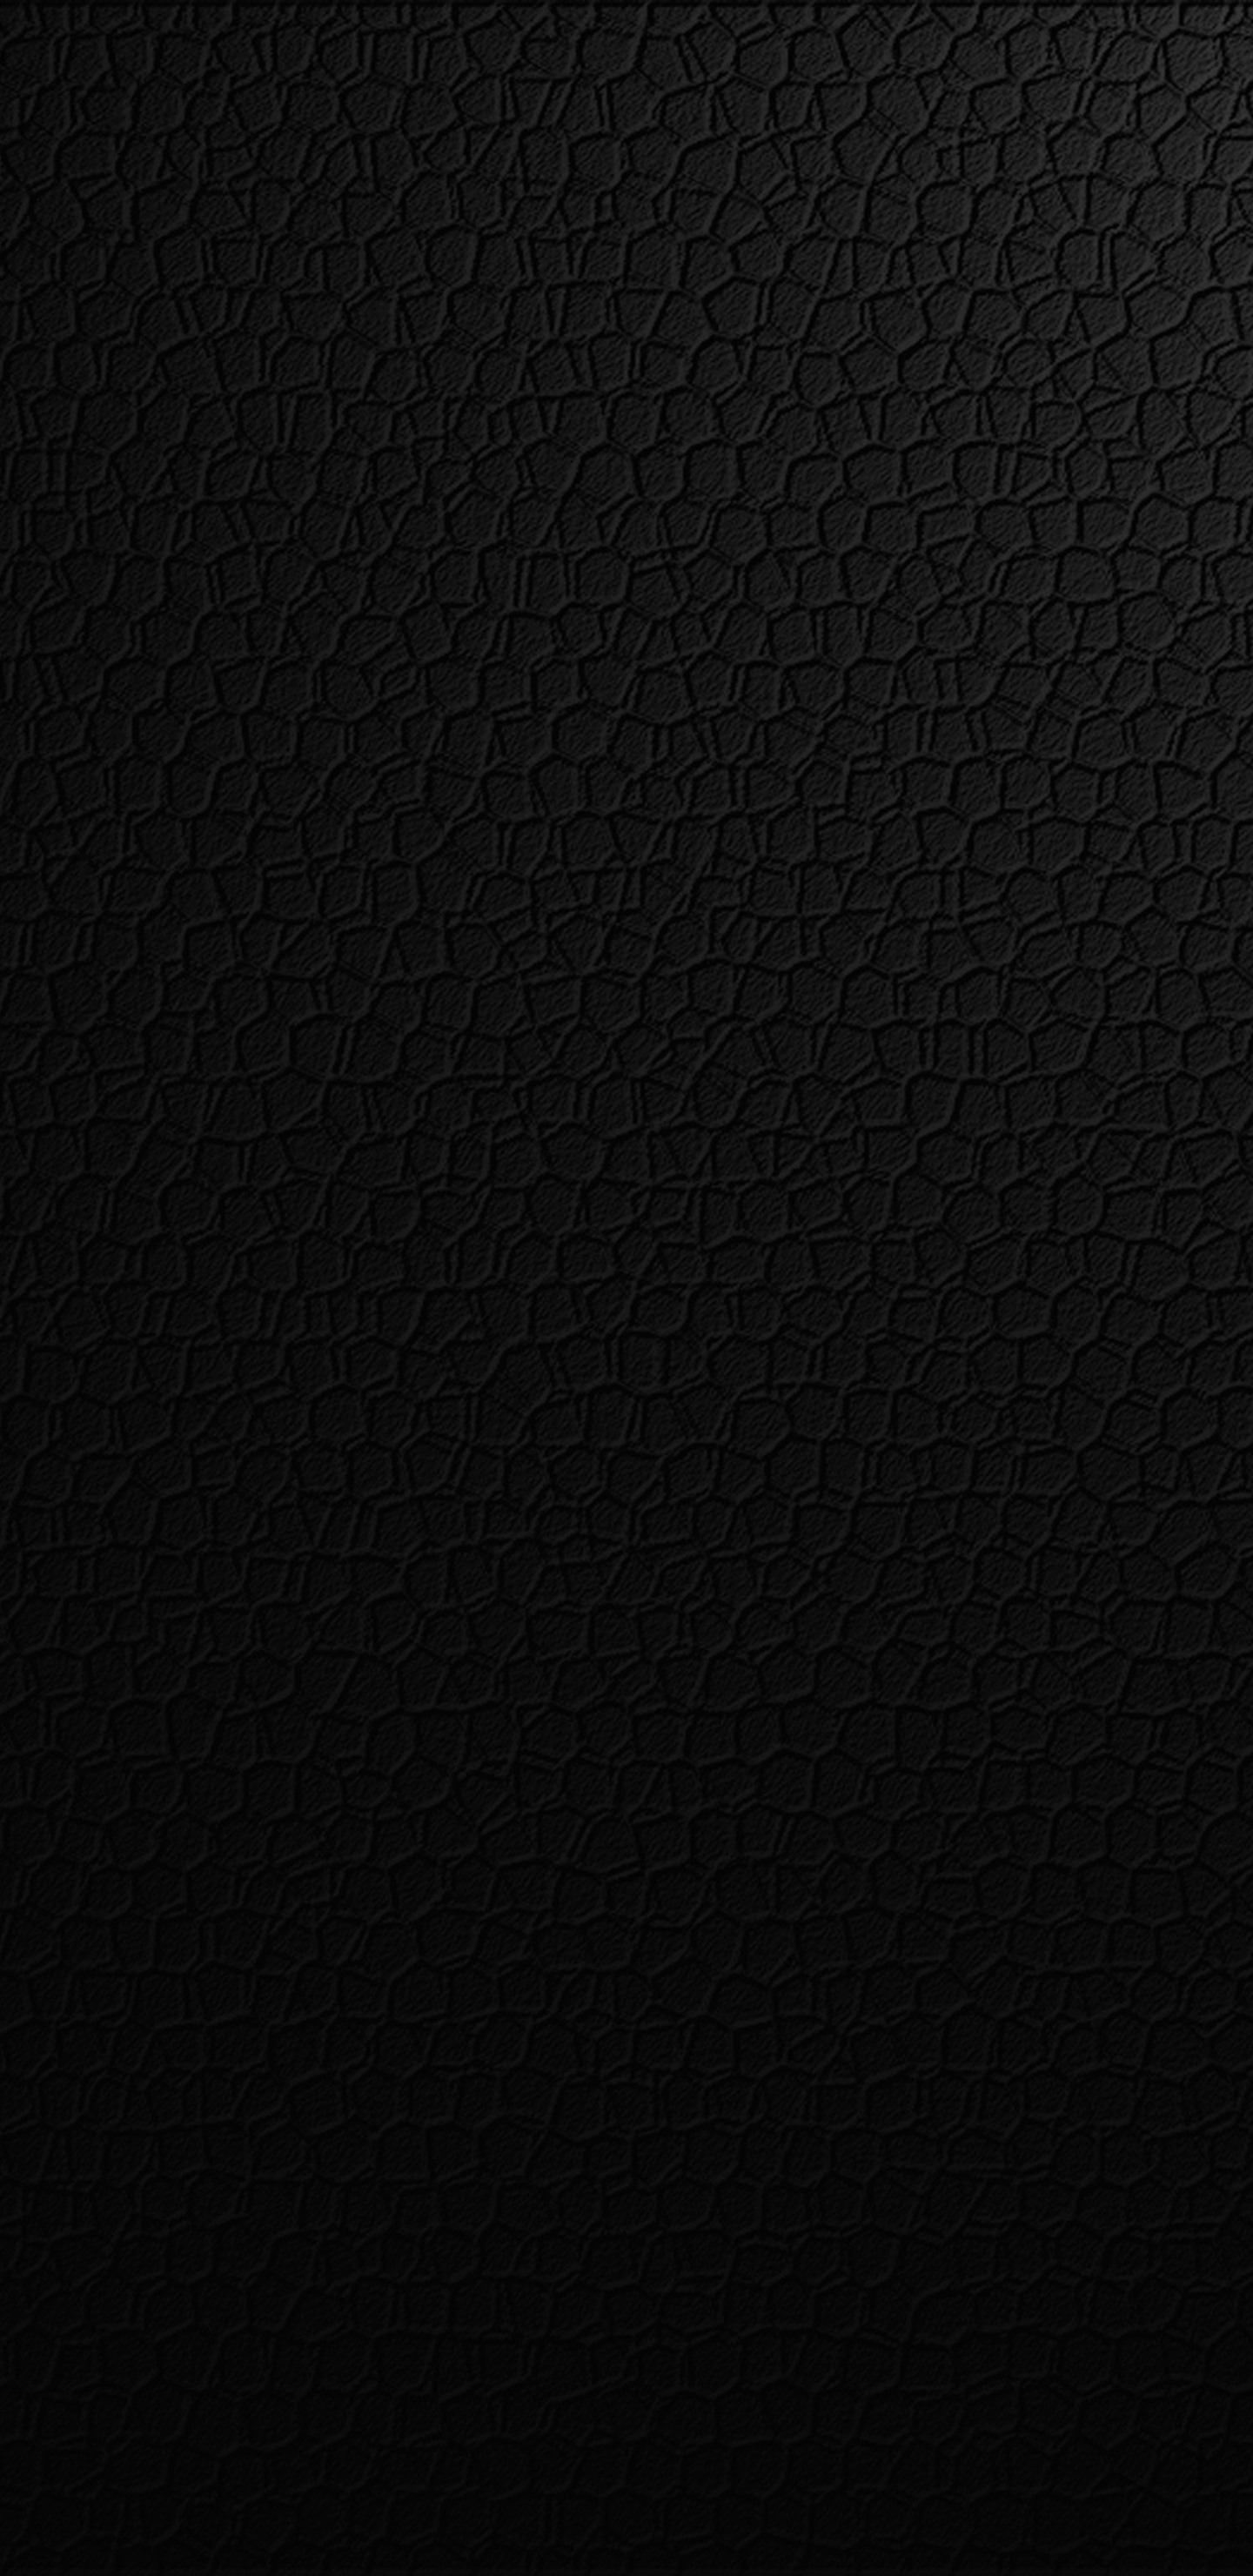 1440x2960 Black Skin Texture Samsung Galaxy Note 9,8, S9,S8,S8+ QHD HD 4k  Wallpapers, Images, Backgrounds, Photos and Pictures